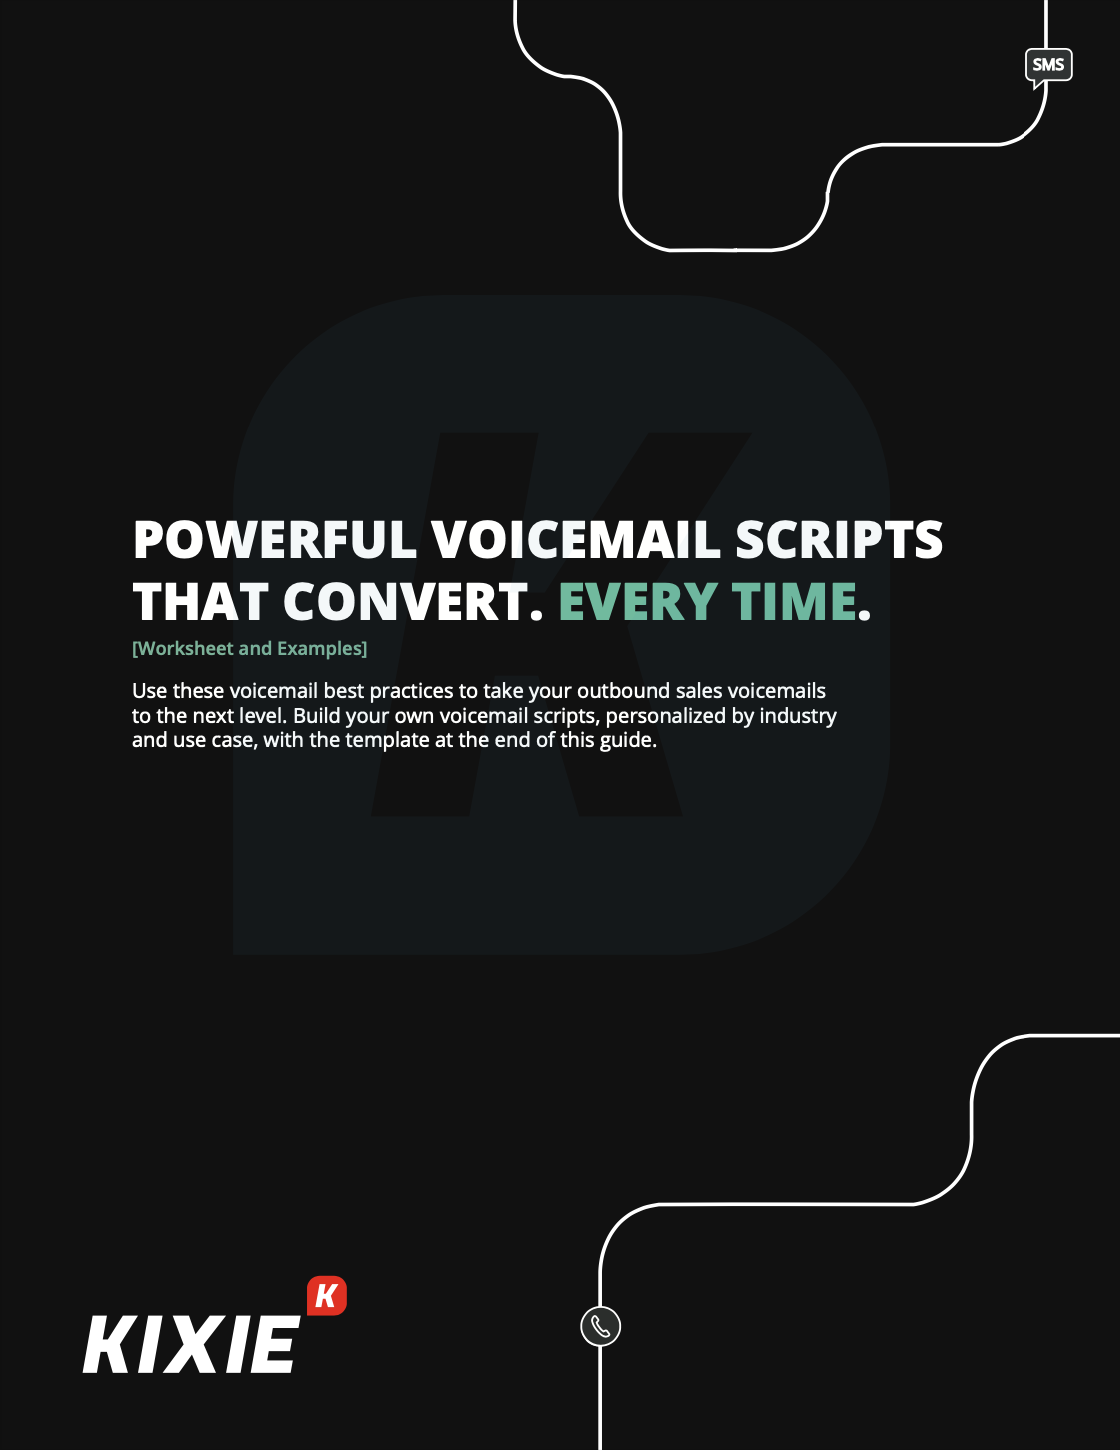 Powerful Voicemail Scripts that Convert Every Time download